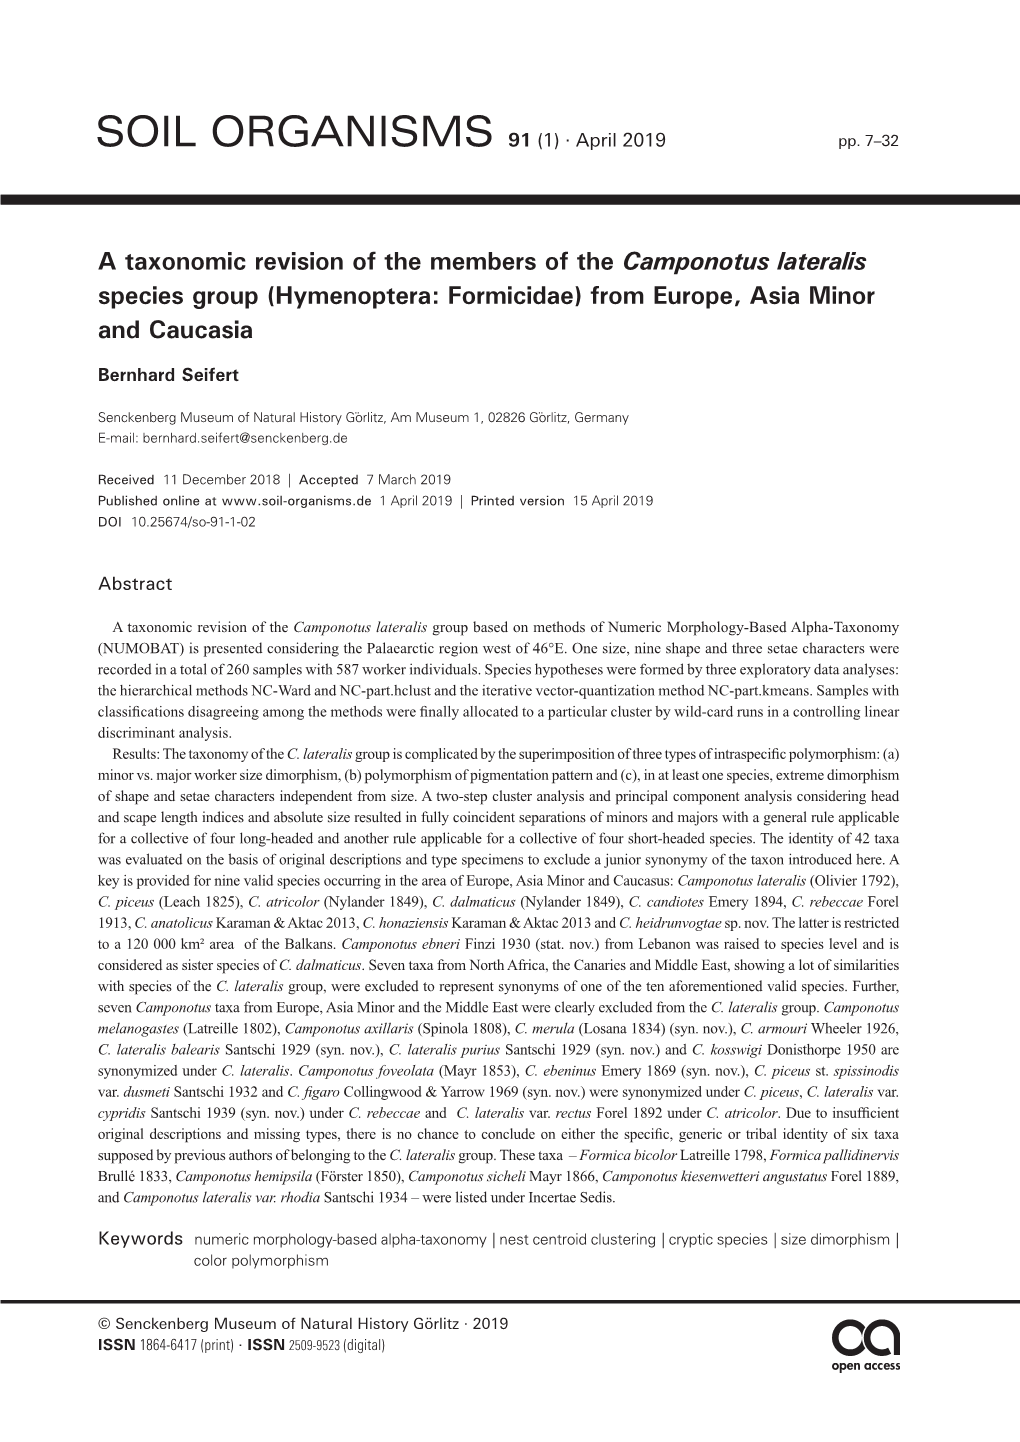 A Taxonomic Revision of the Members of the Camponotus Lateralis Species Group (Hymenoptera: Formicidae) from Europe, Asia Minor and Caucasia